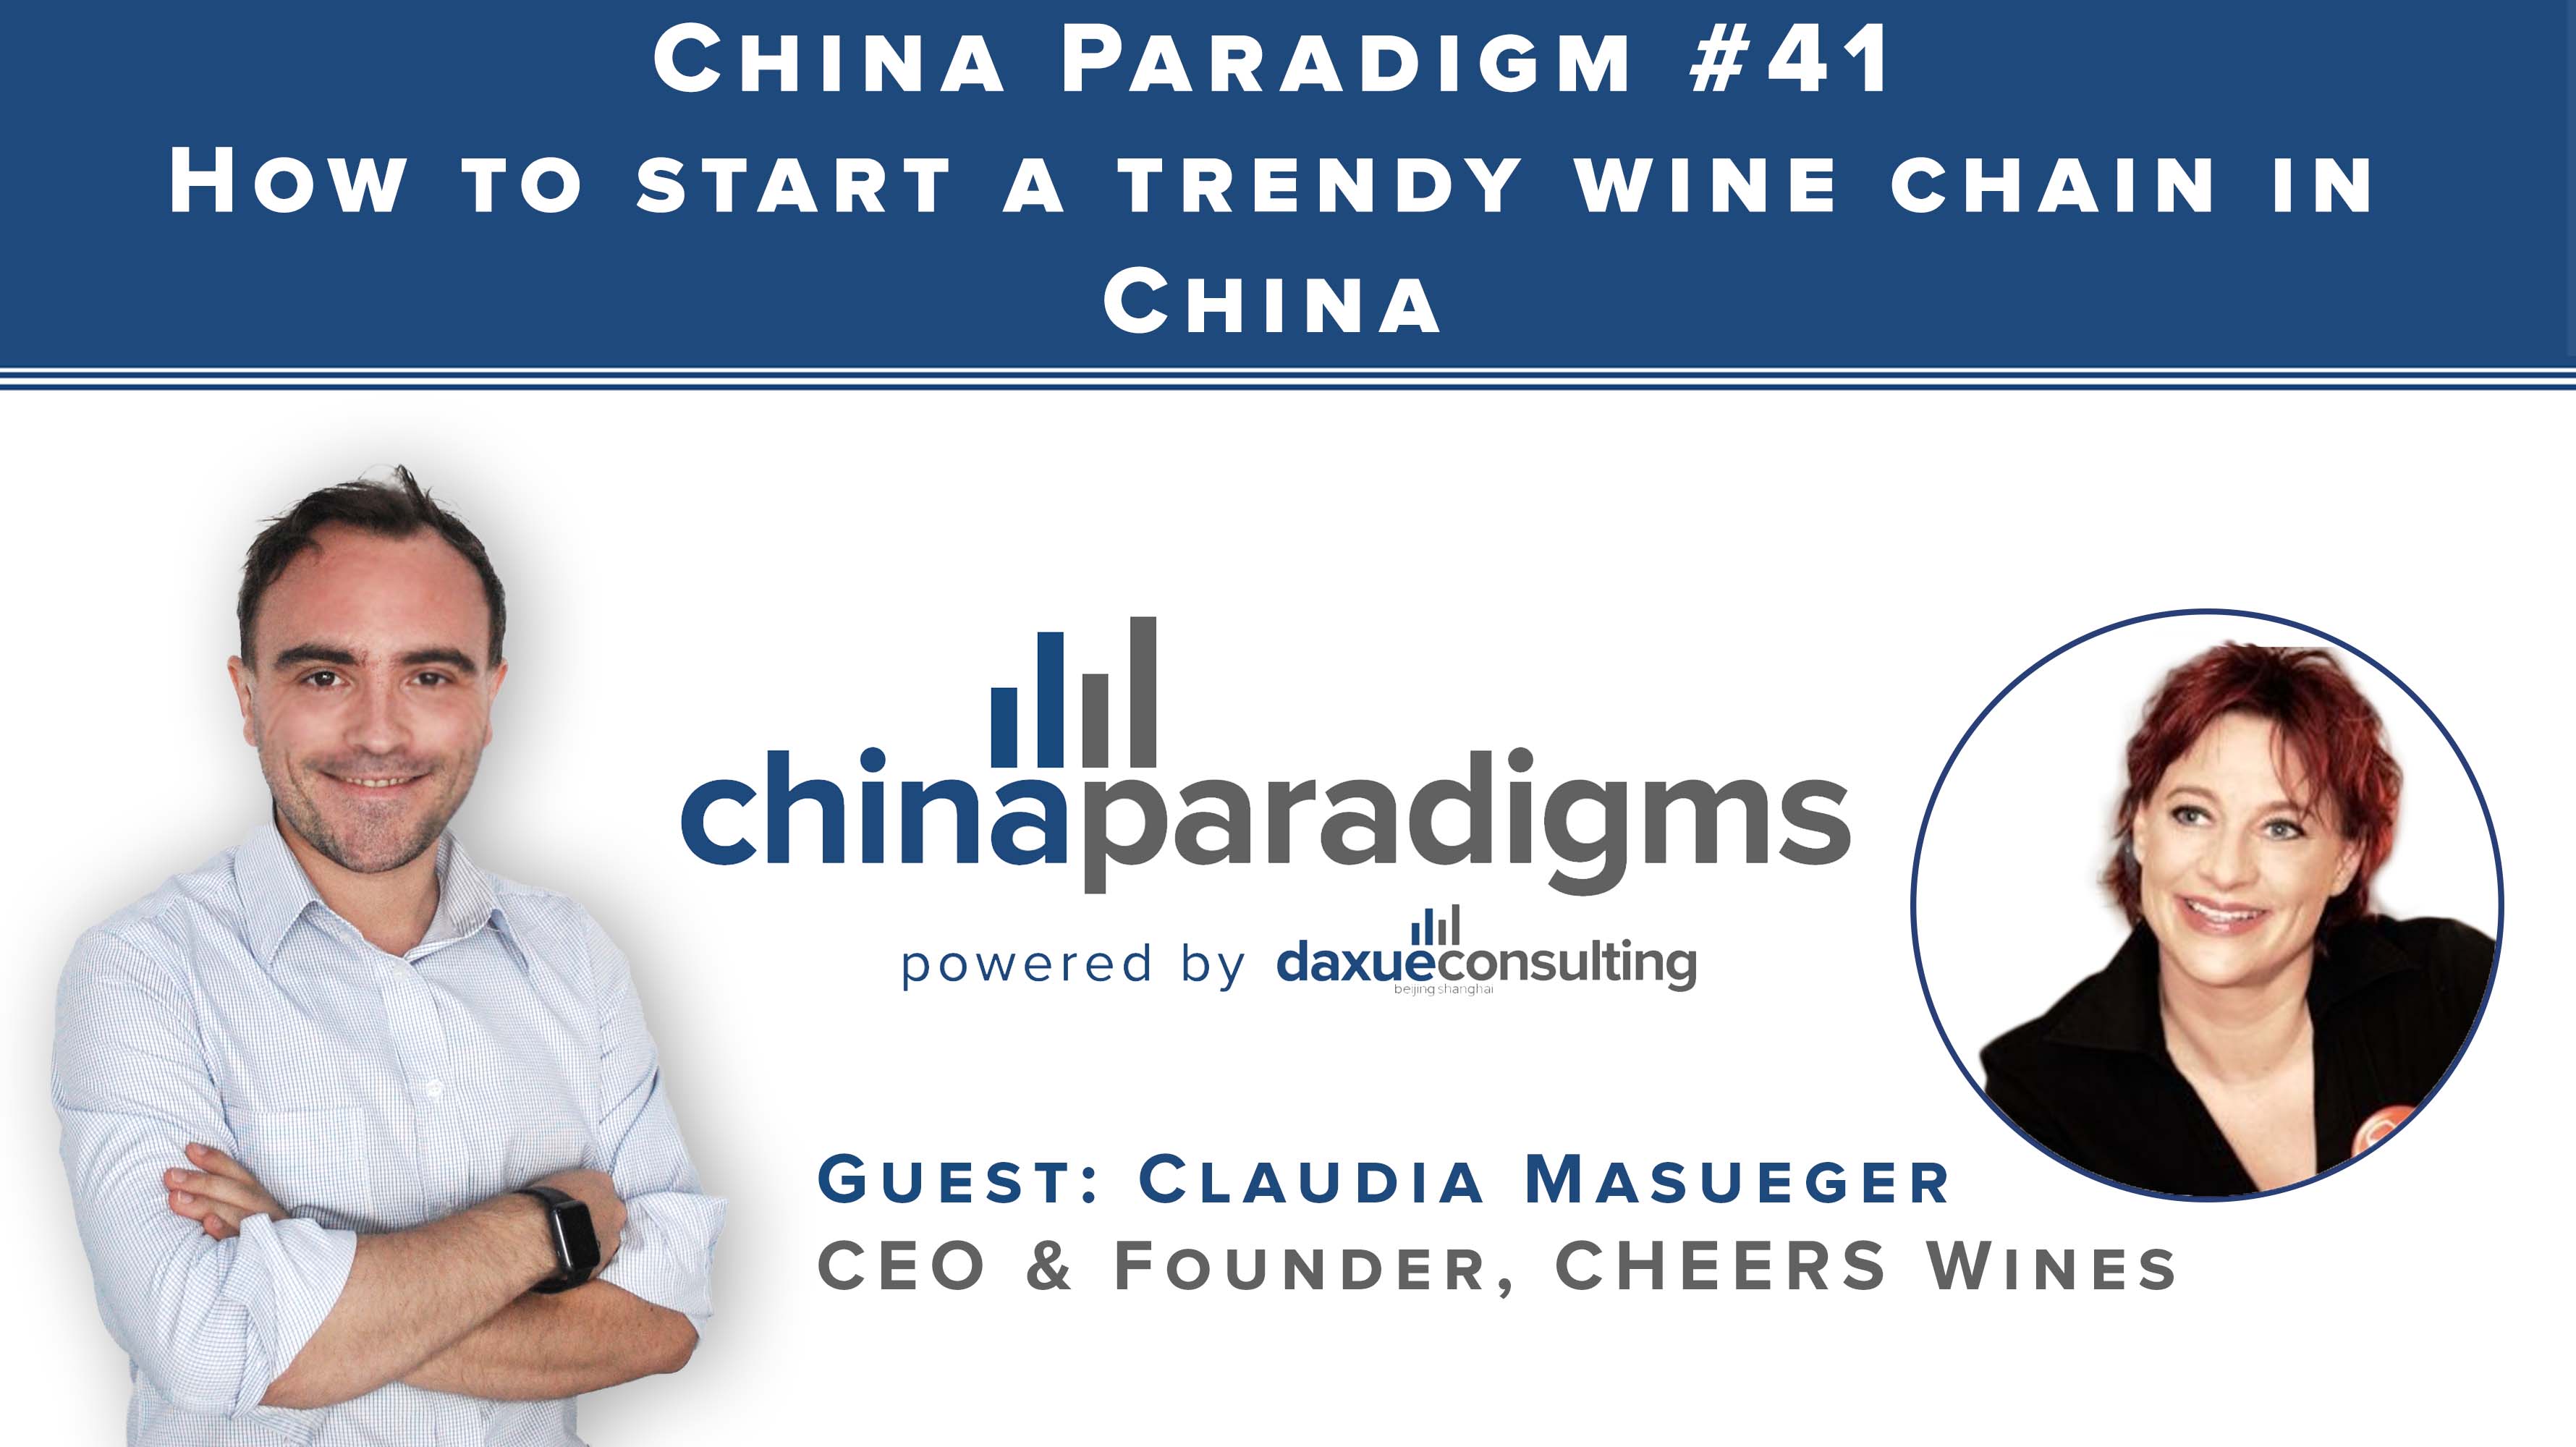 [Podcast] China Paradigm 41: How to start a trendy wine chain in China